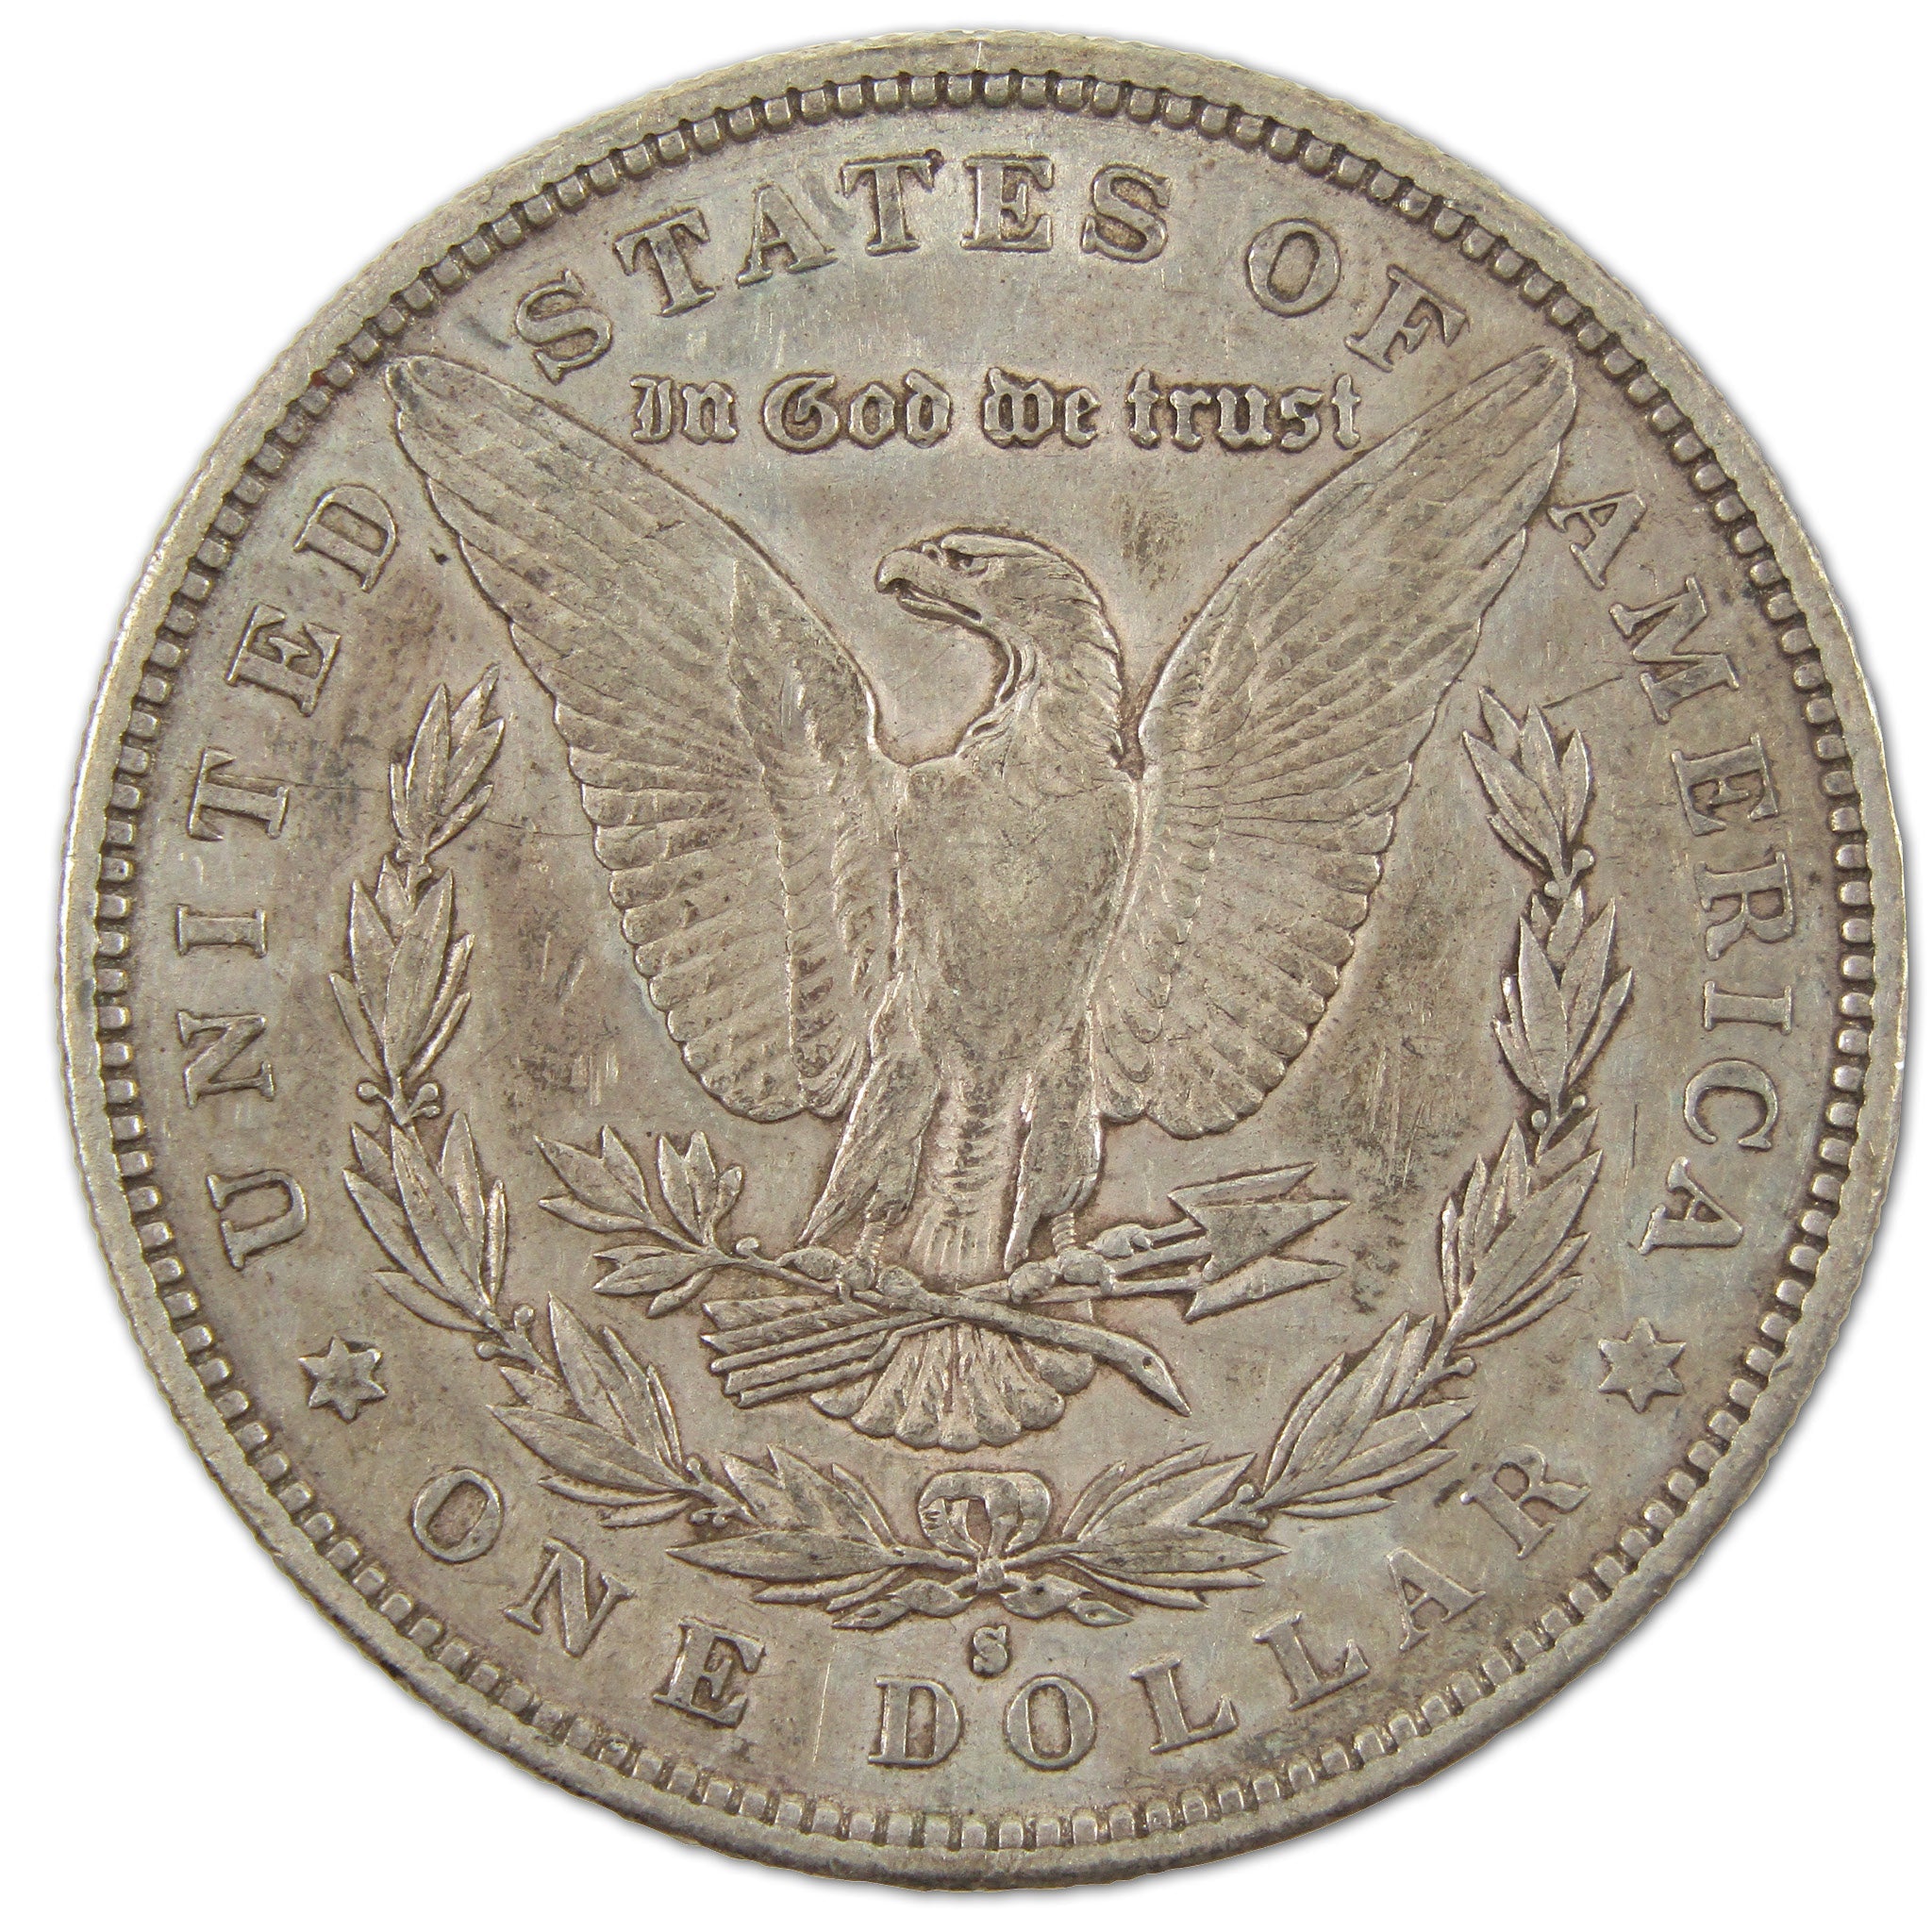 1892 S Morgan Dollar XF EF Extremely Fine Details Silver $1 SKU:I10760 - Morgan coin - Morgan silver dollar - Morgan silver dollar for sale - Profile Coins &amp; Collectibles